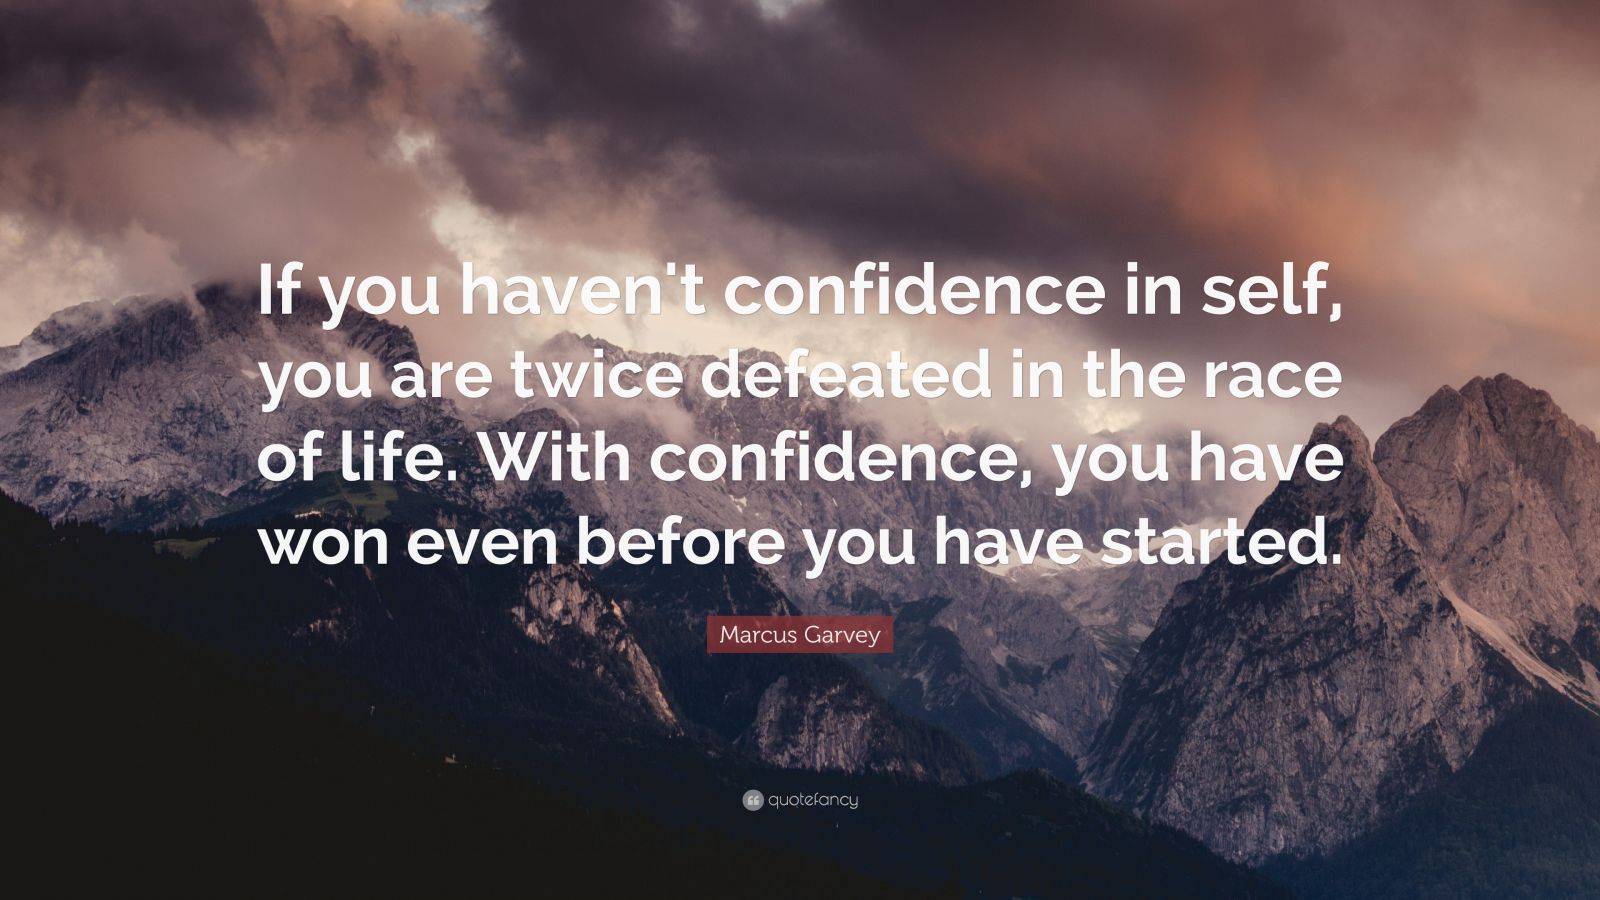 Marcus Garvey Quote: “If you haven't confidence in self, you are twice ...